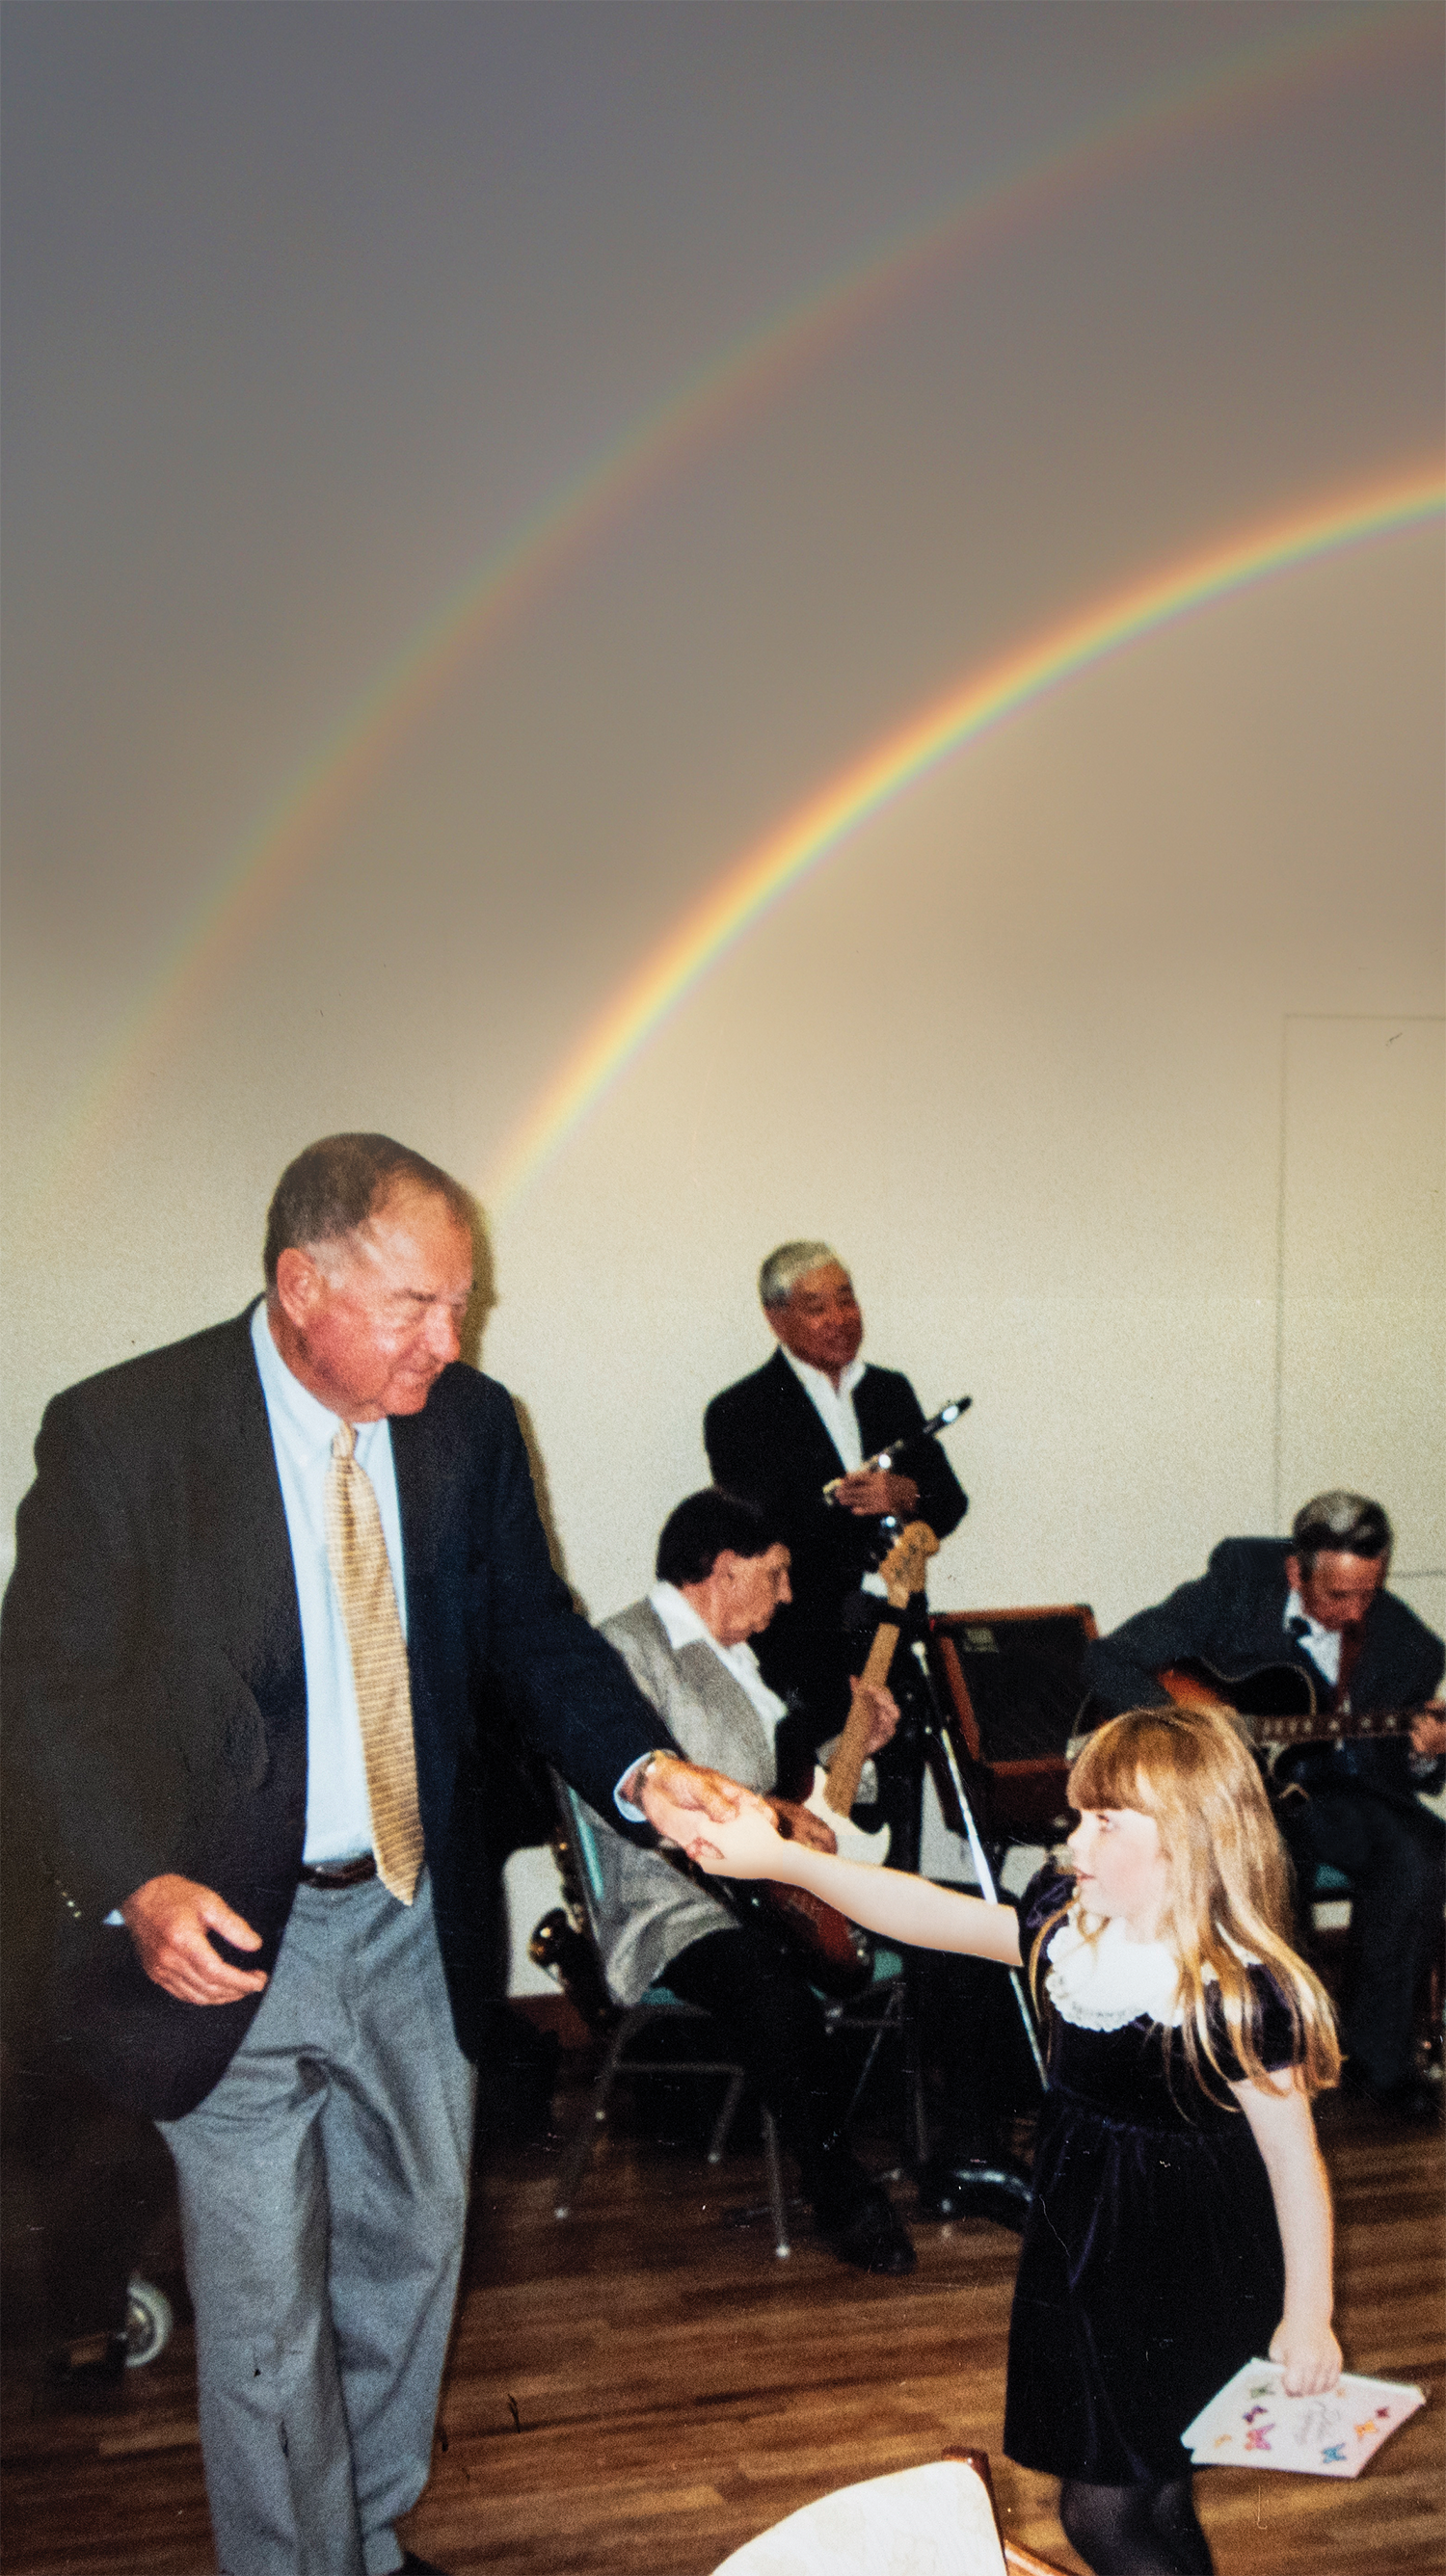 Autumn and her grandfather, a Cal alum, dancing with a rainbow on the wall behind them